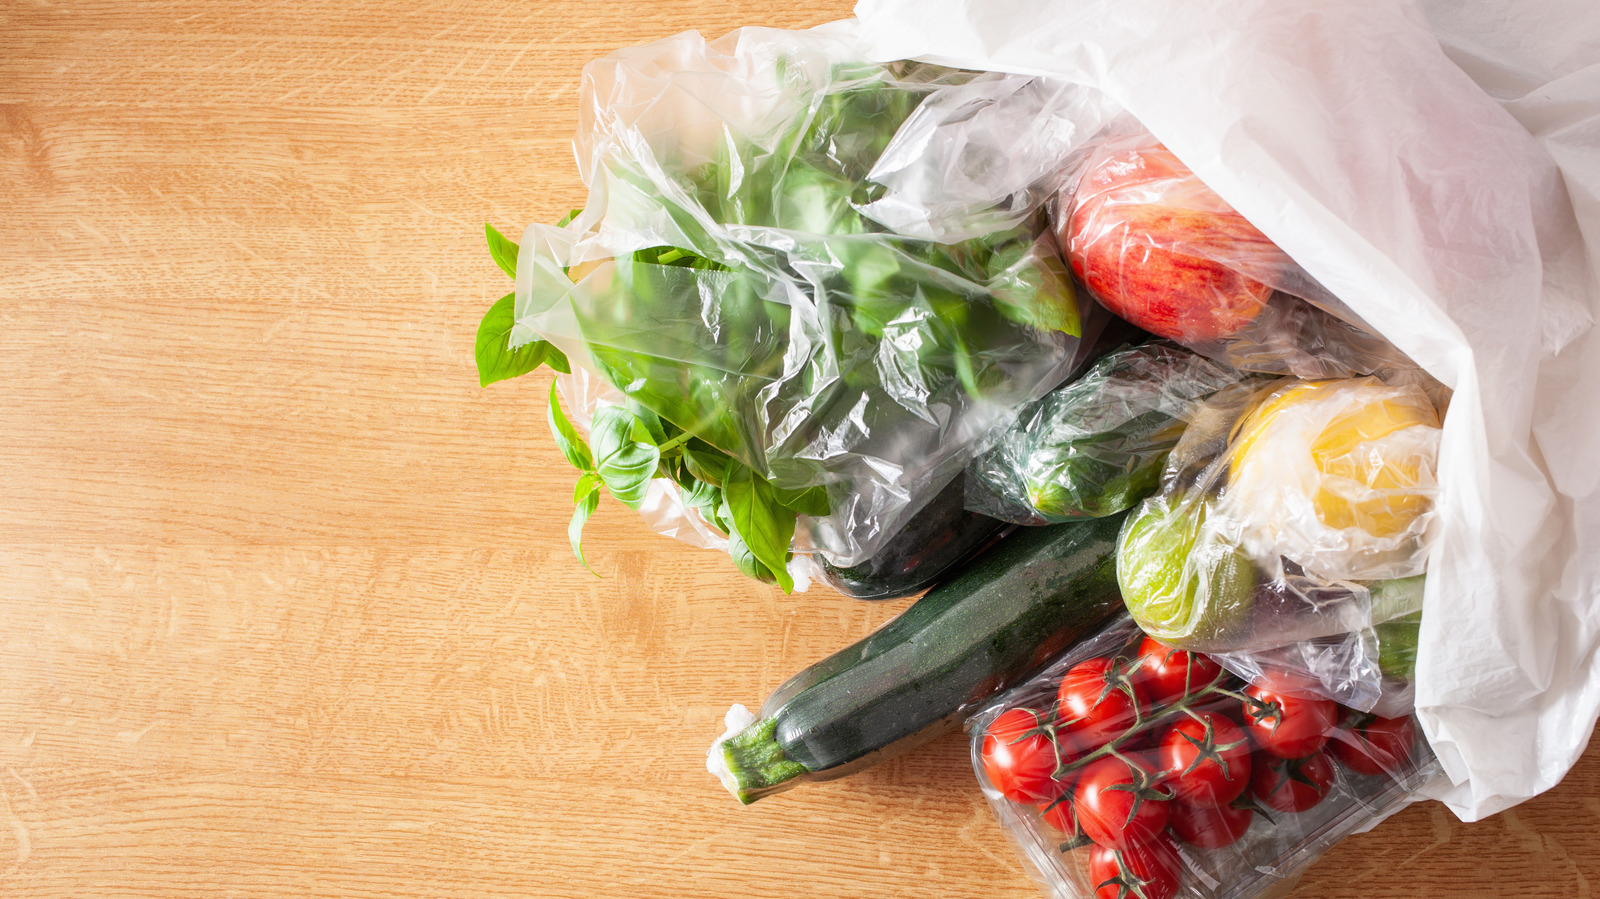 Those Plastic Bags From The Grocery Store Won't Keep Your Produce